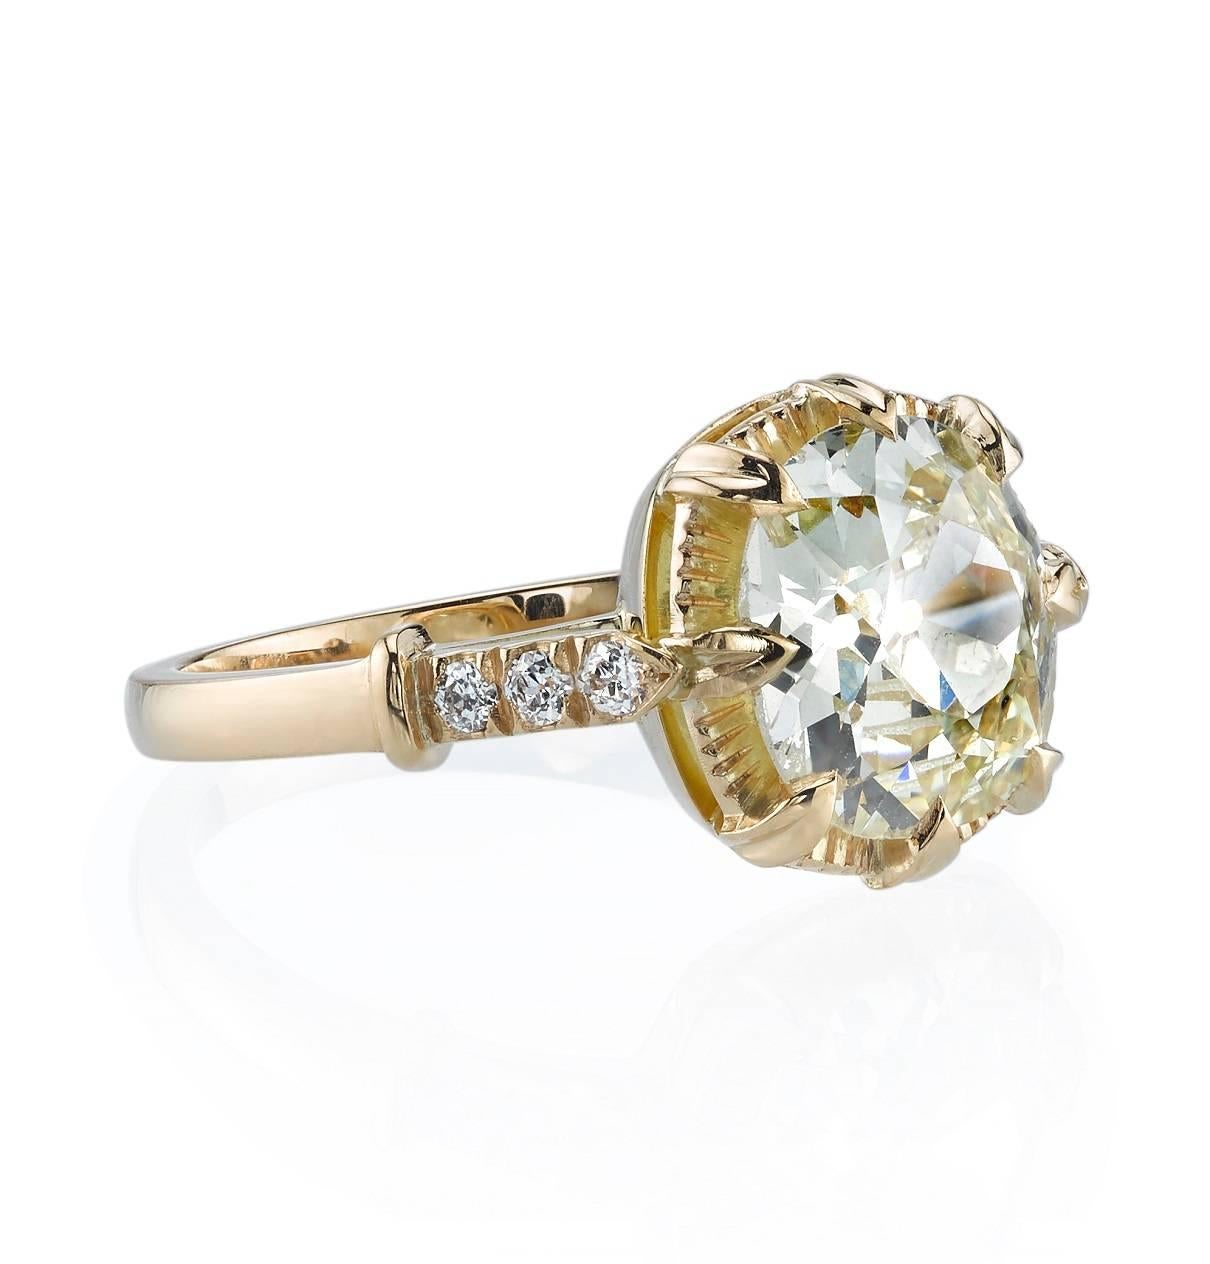 2.55ct OP/VS2 Cushion cut diamond EGL certified and set in a handcrafted 18k yellow gold mounting.  A sweet solitaire design featuring a unique illusion and low profile.